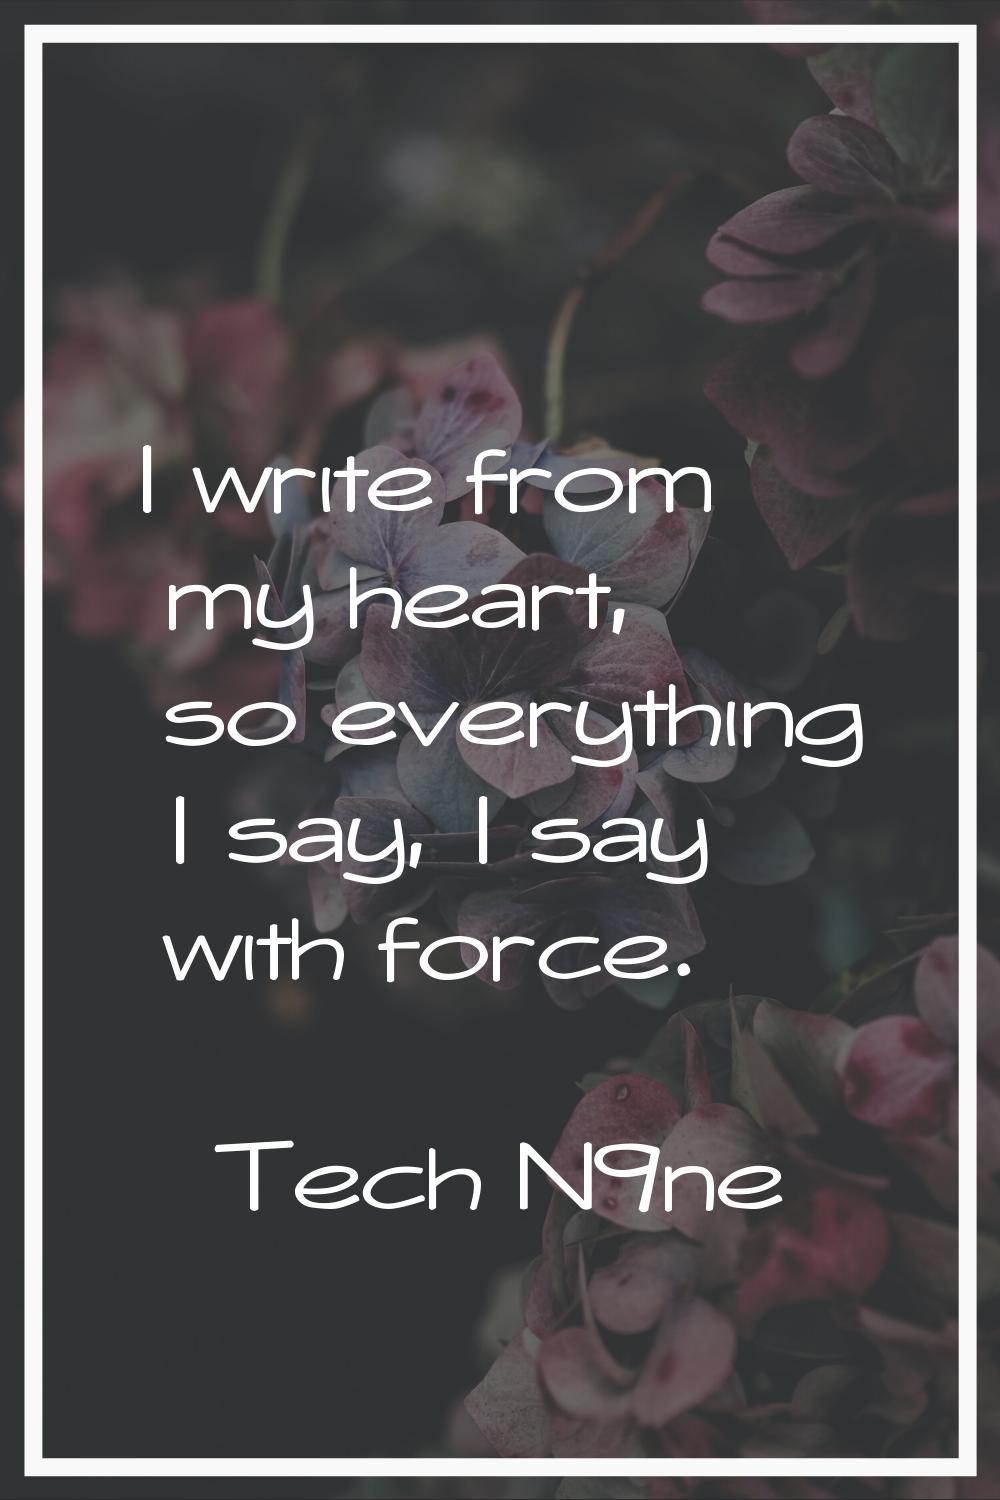 I write from my heart, so everything I say, I say with force.